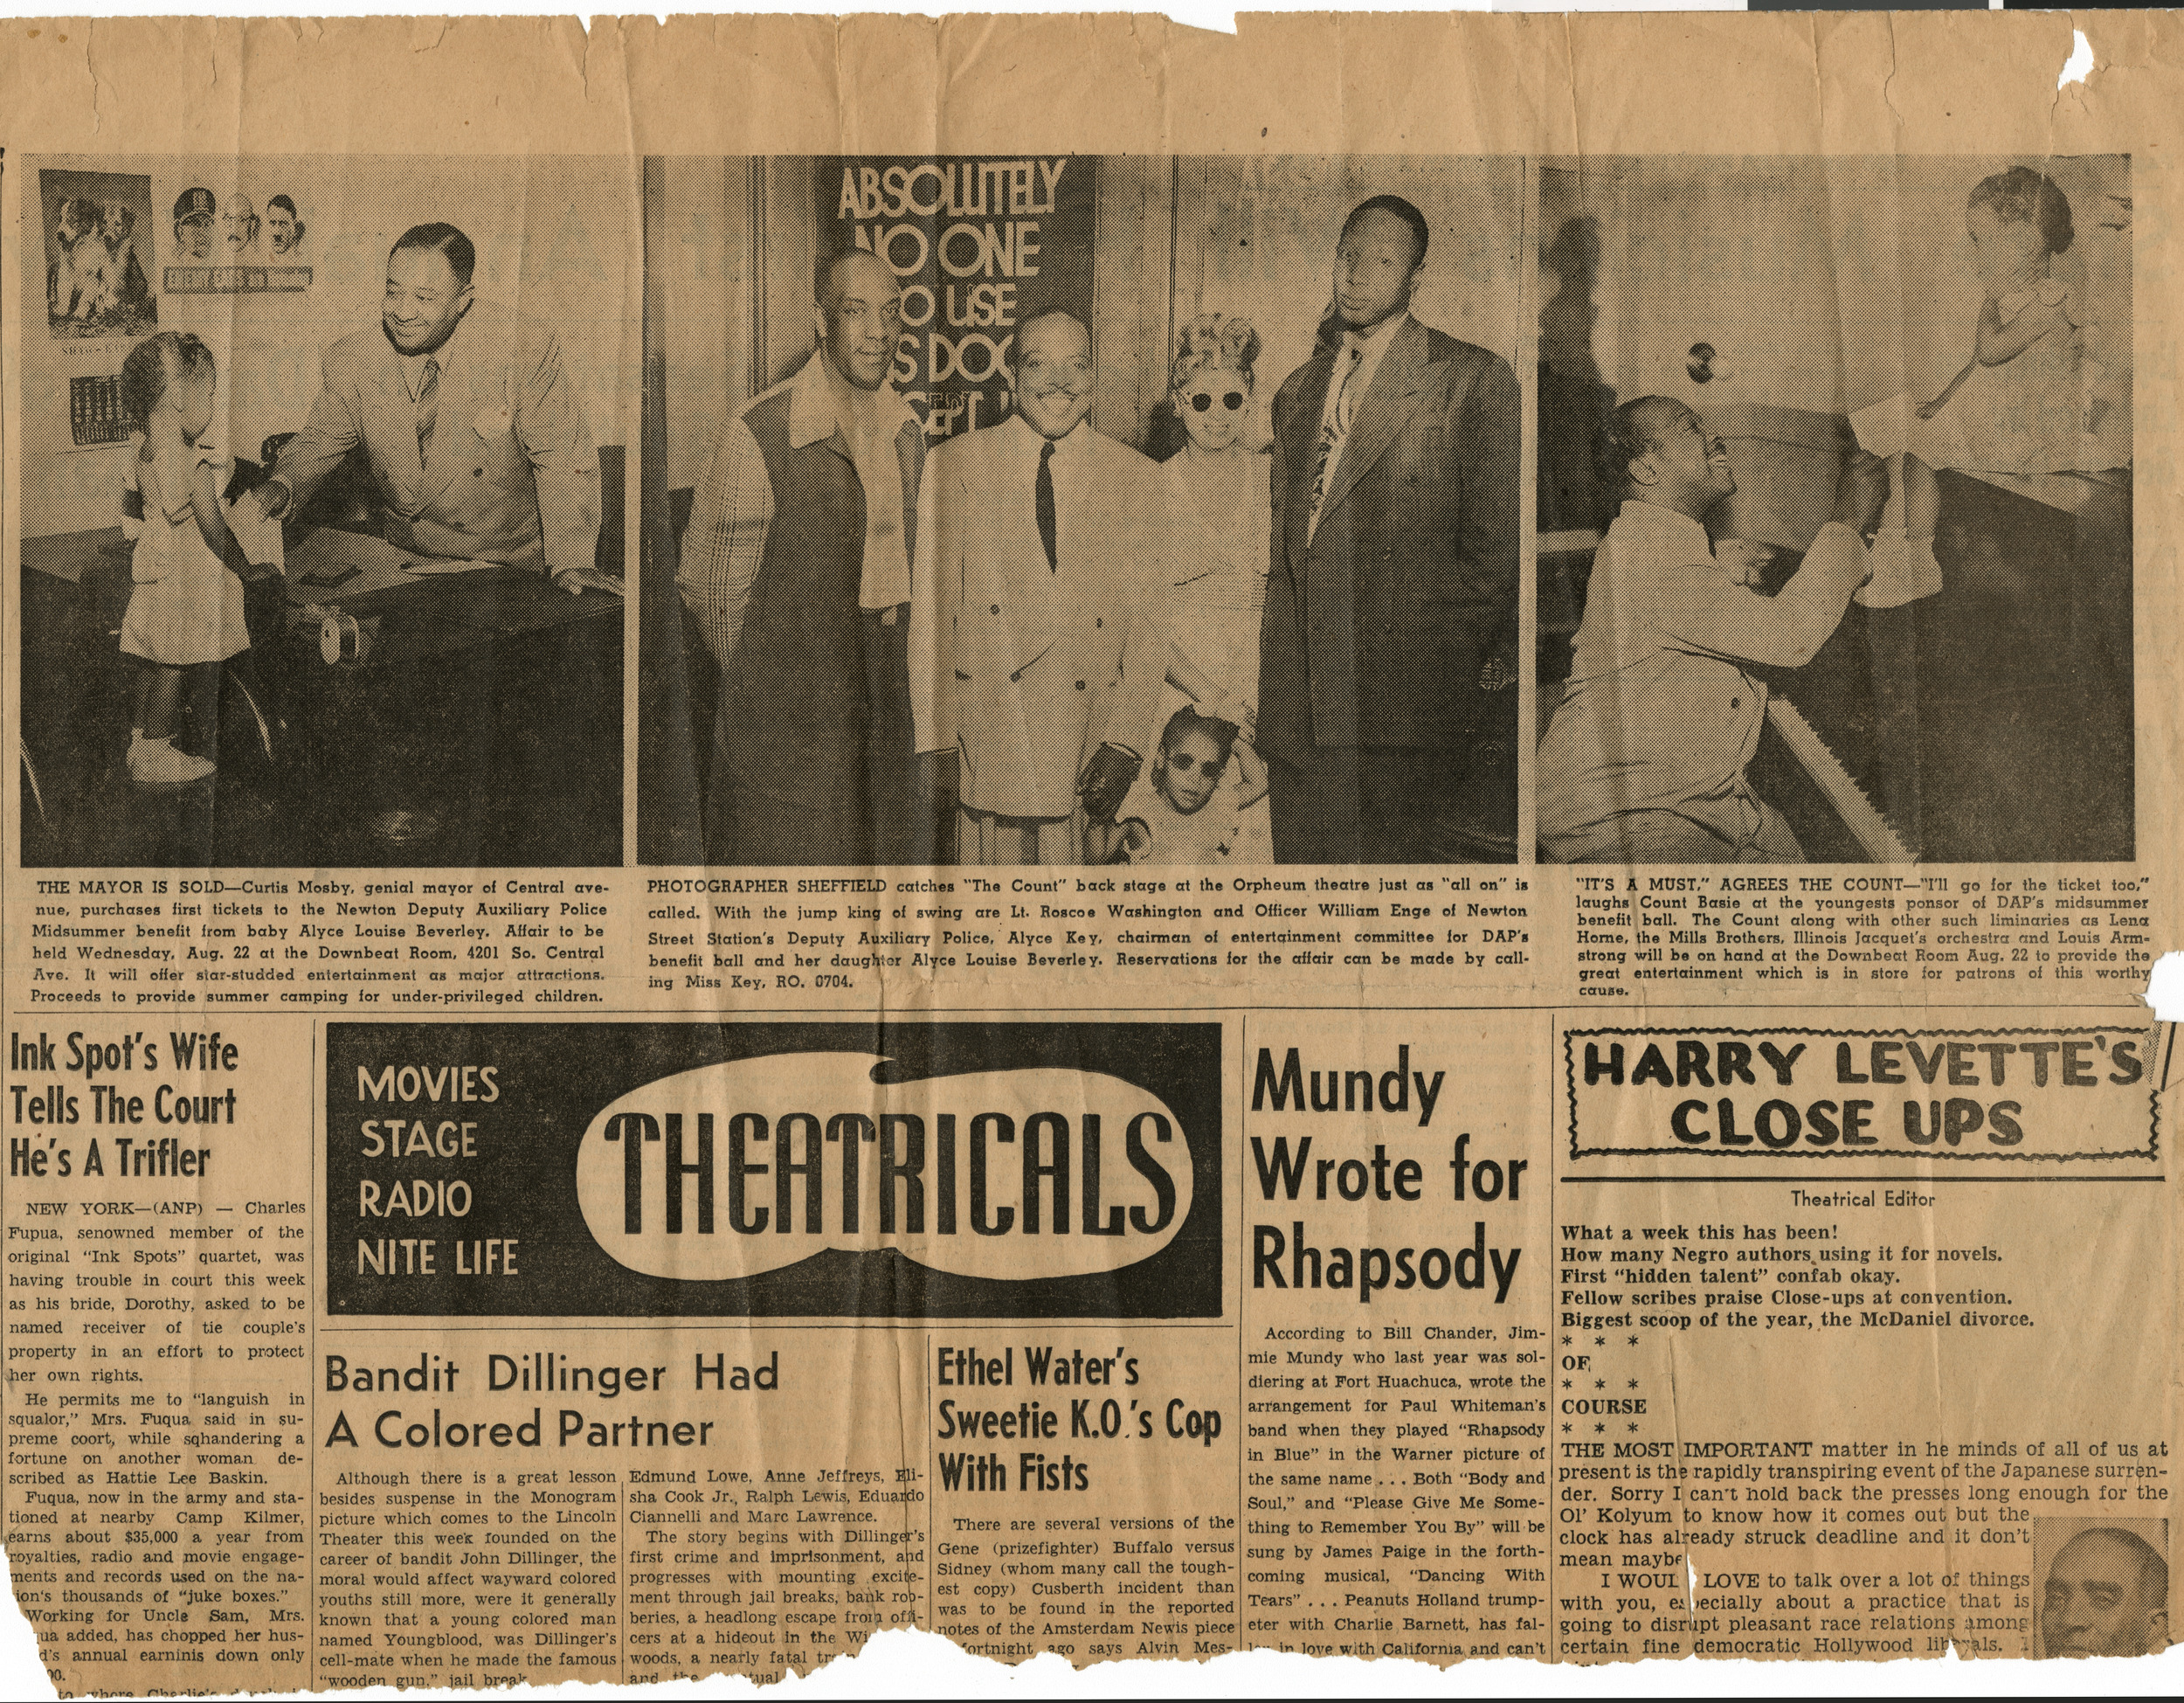 Newspaper clipping, Movies, Stage, Radio, Nite Life, Theatricals, publication unknown, no date